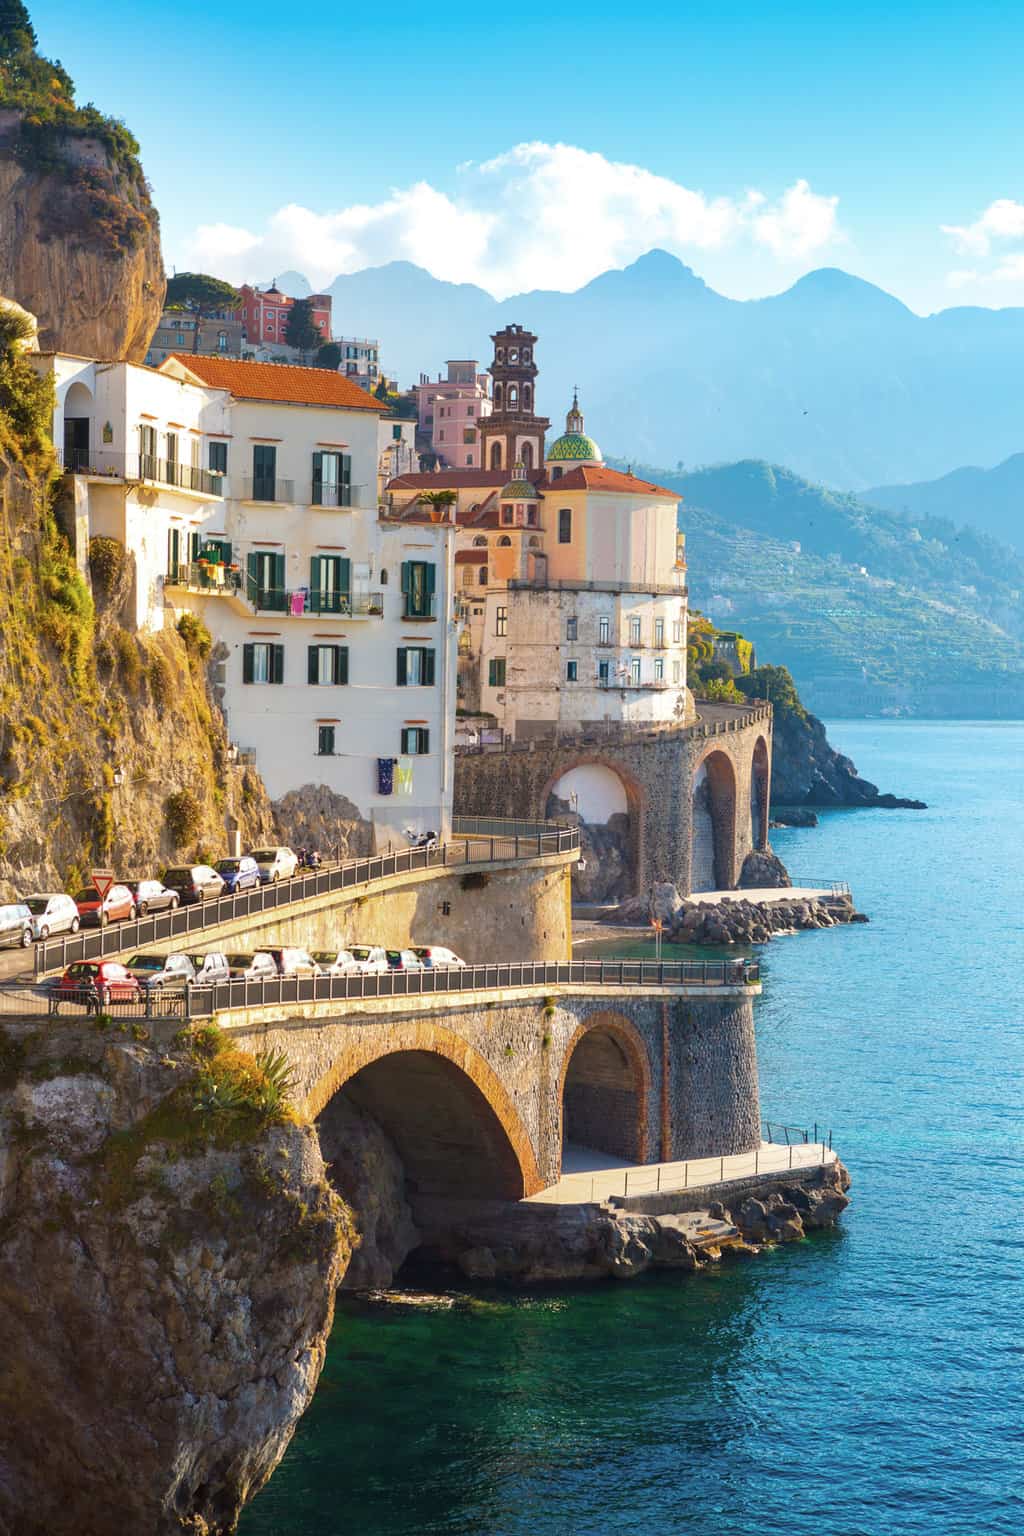 A costal town on the cliffs of the Amalfi coast overlooking the water with hills in the soft orange glow of morning.